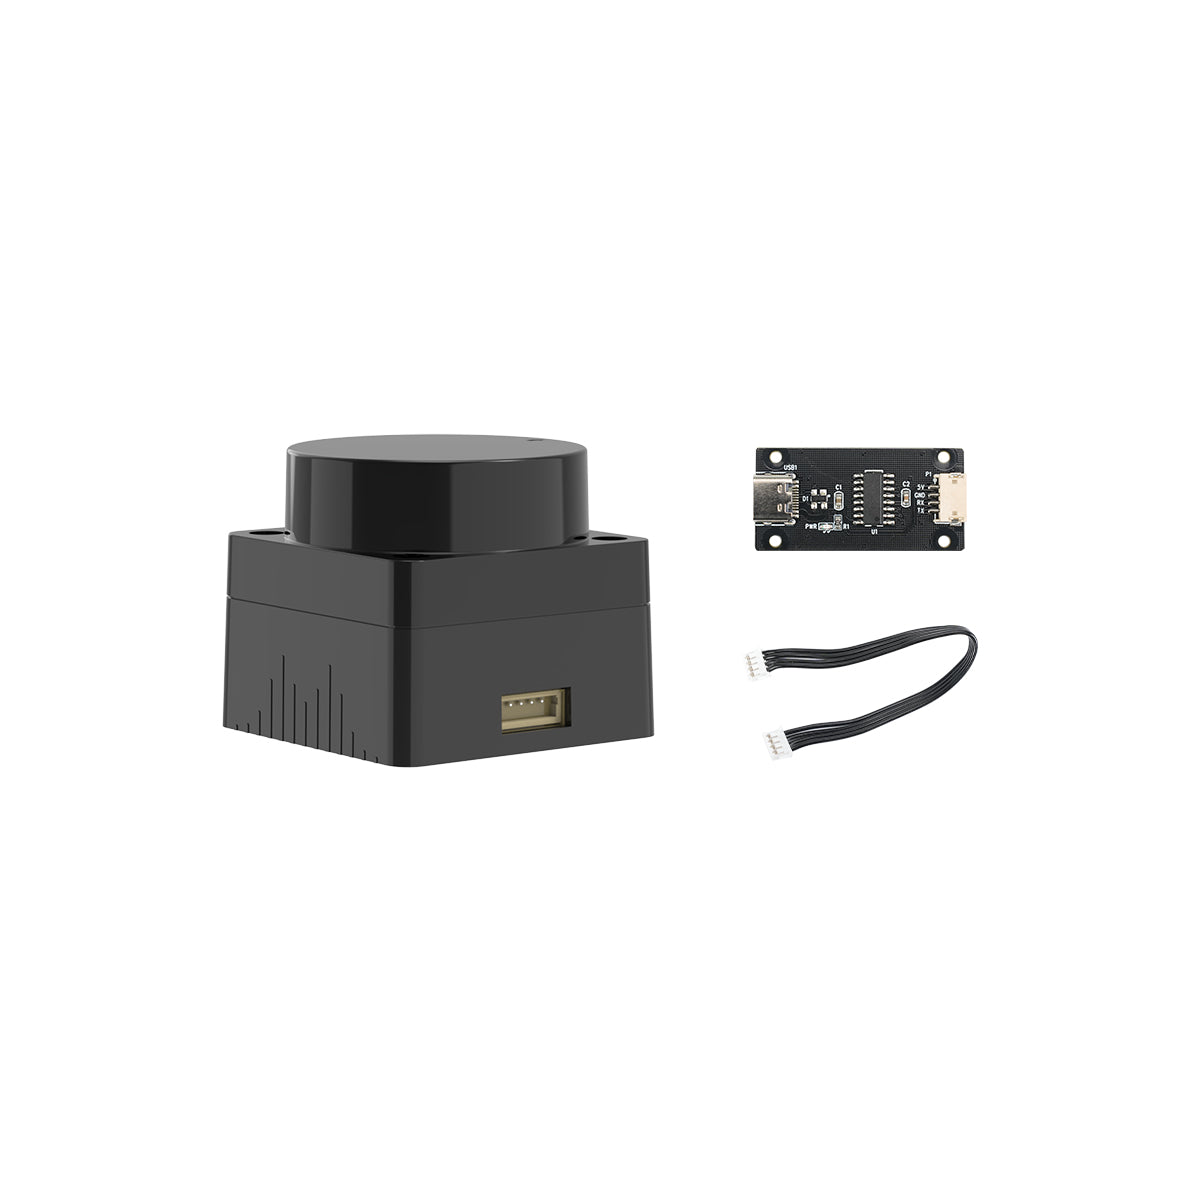 Orbbec Oradar MS200 Lidar Compatible with ROS2 Robot SLAM Mapping Navigation TOF Ranging